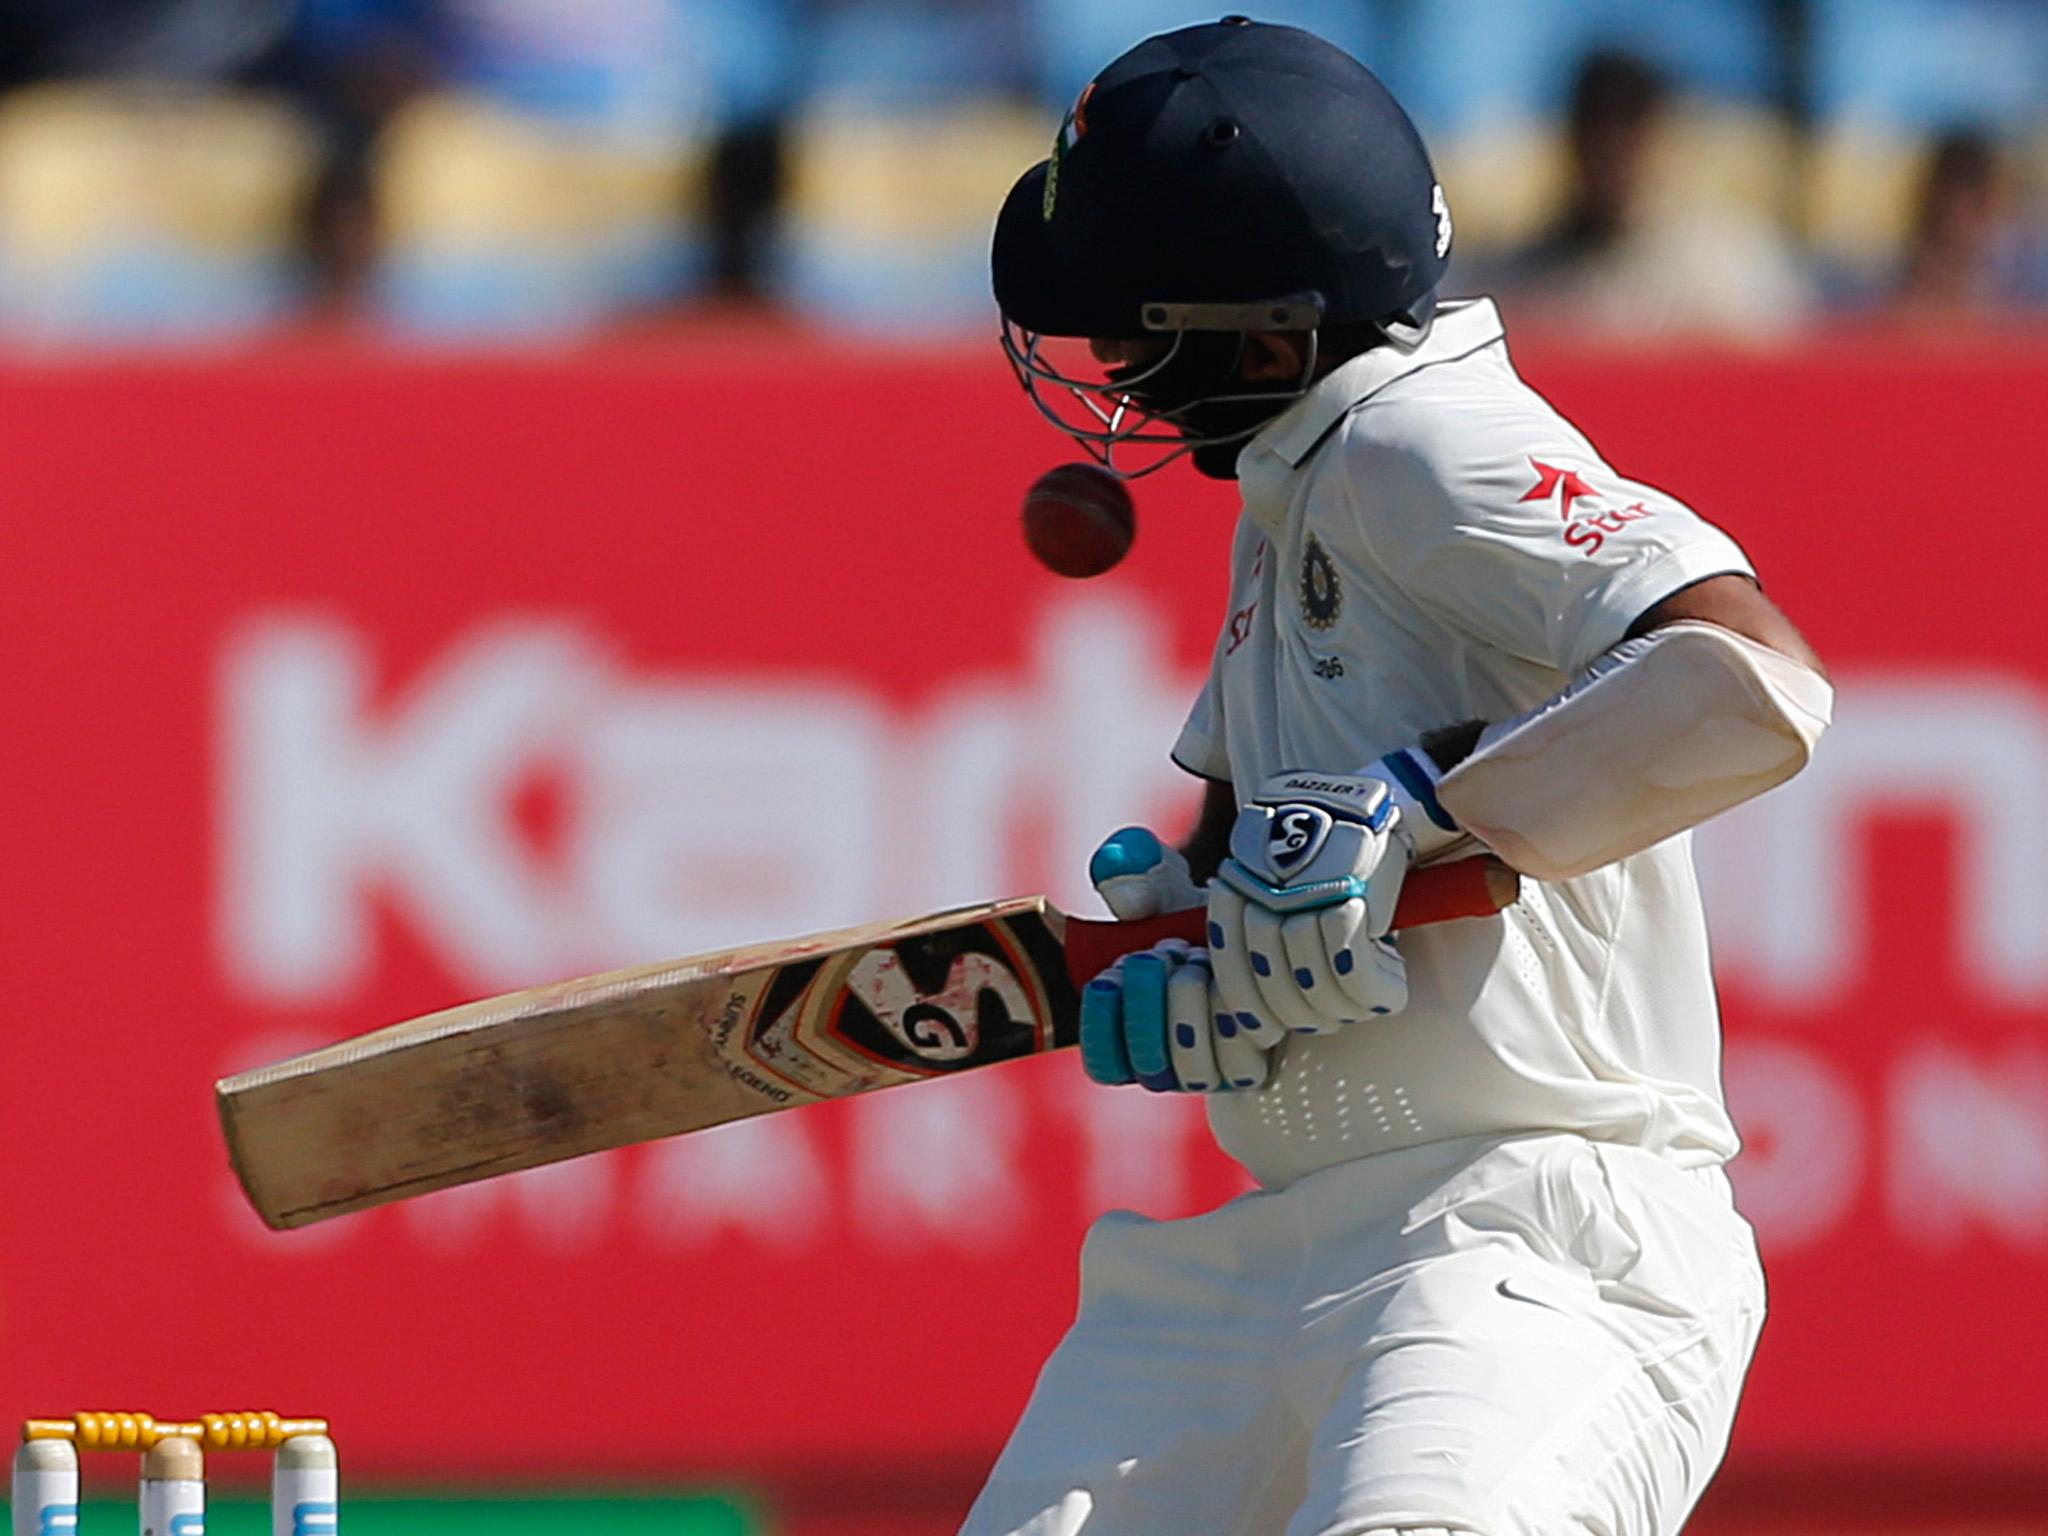 A ball hits the helmet of Pujara during his first Innings against England